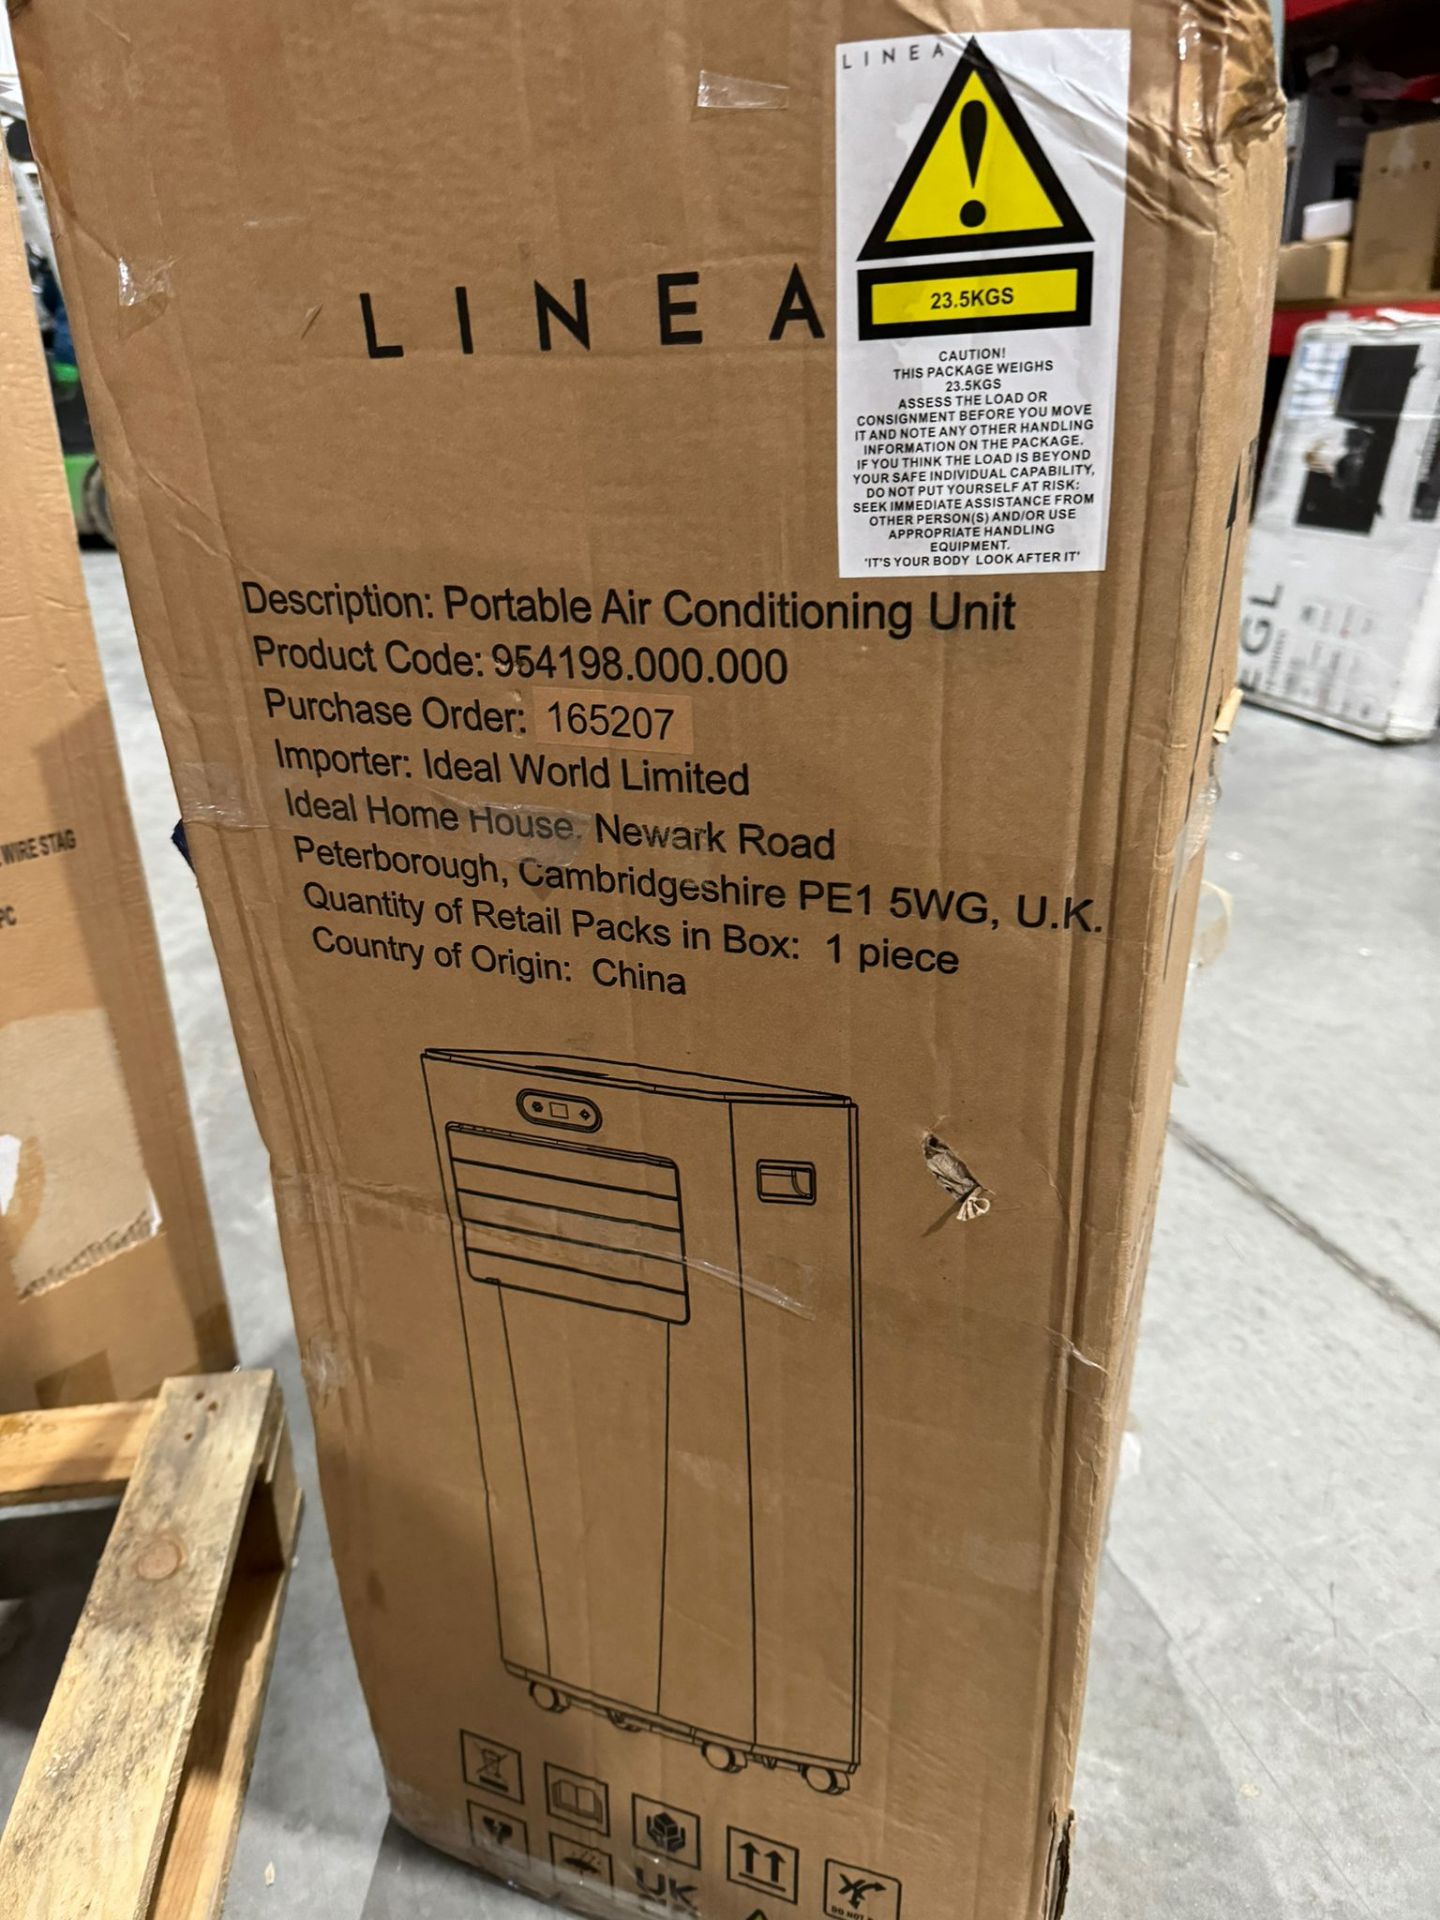 1 x LINEA Portable Air Conditioning Unit - 954198.000.000 with Window Kit - NO RESERVE - Image 2 of 8